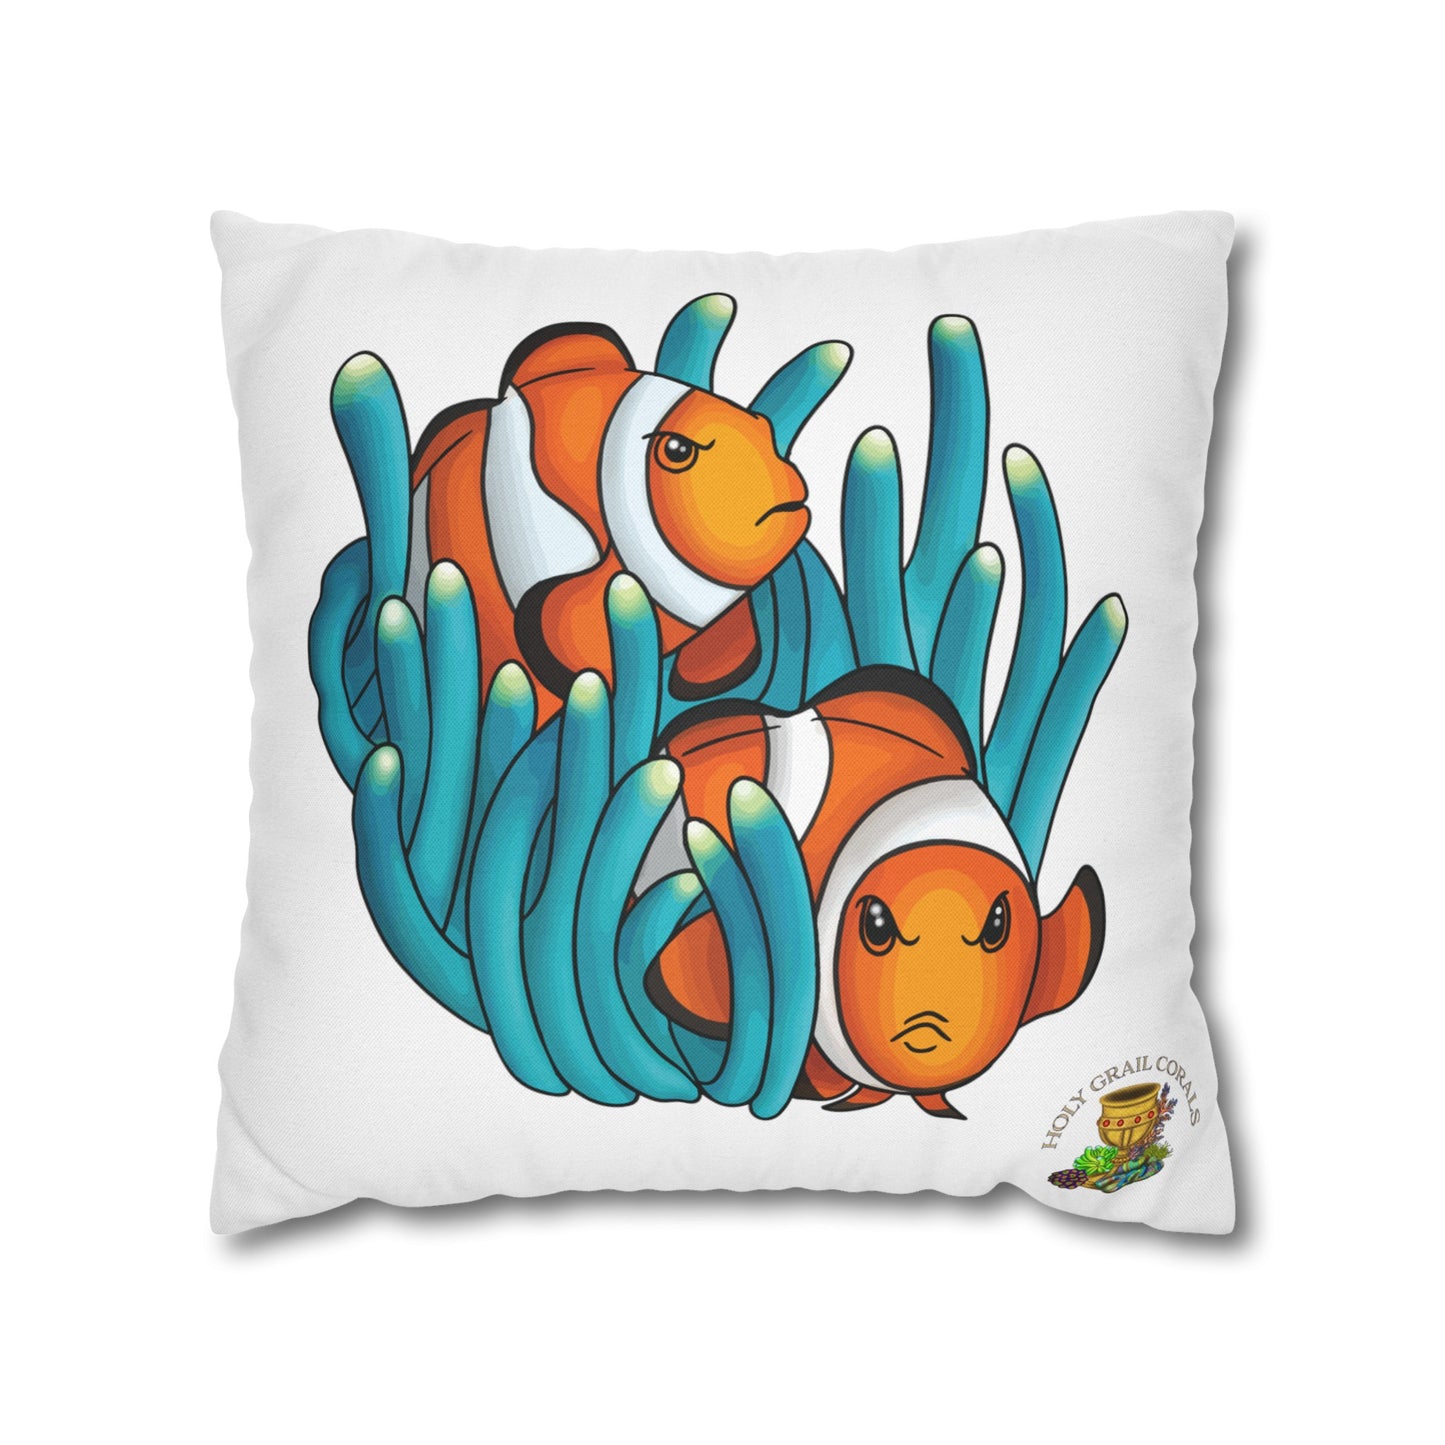 Mean Clown Fish Pair Square Pillow Cover